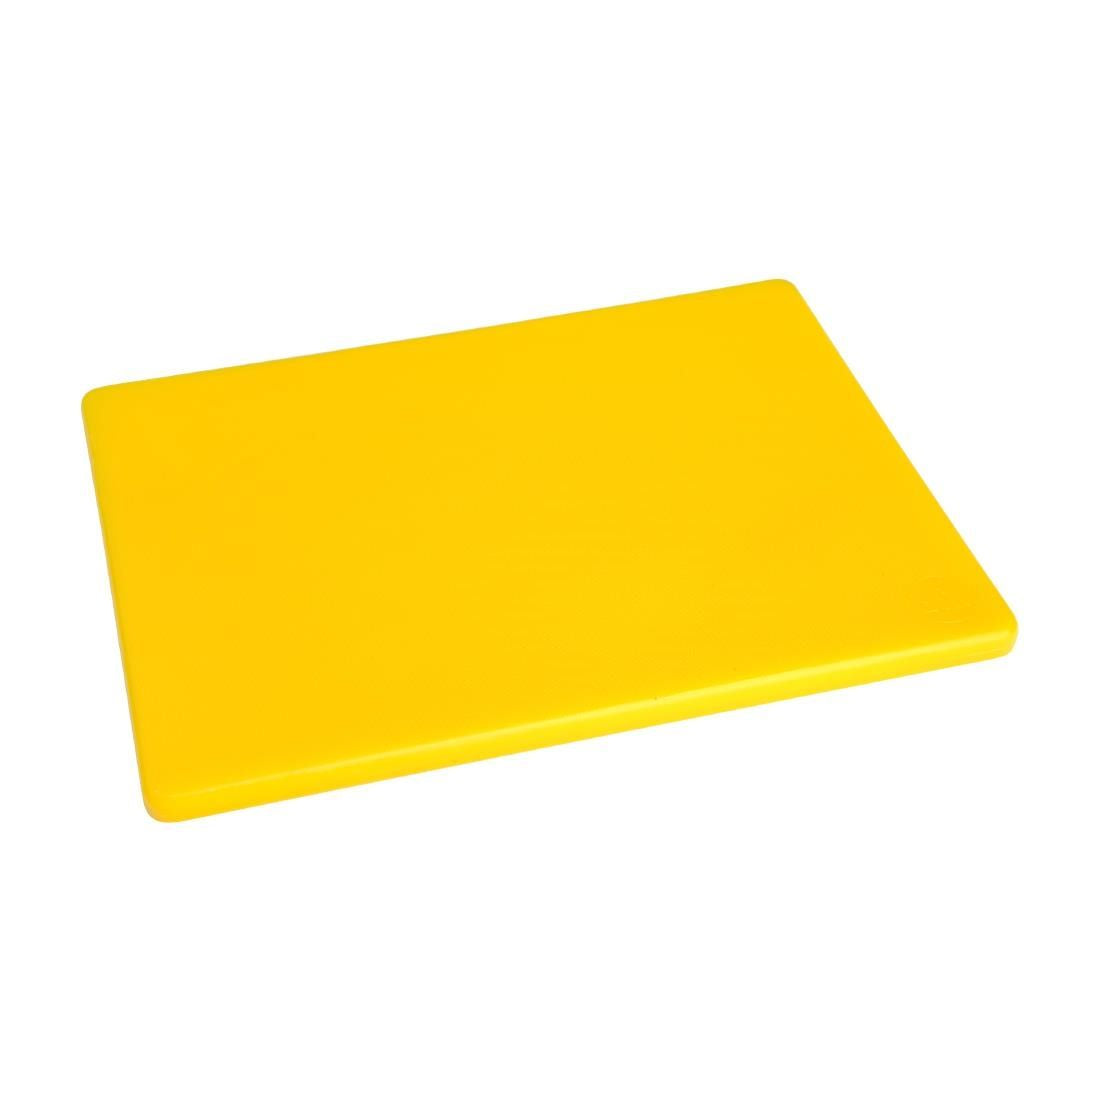 GH796 Hygiplas Low Density Yellow Chopping Board Small JD Catering Equipment Solutions Ltd